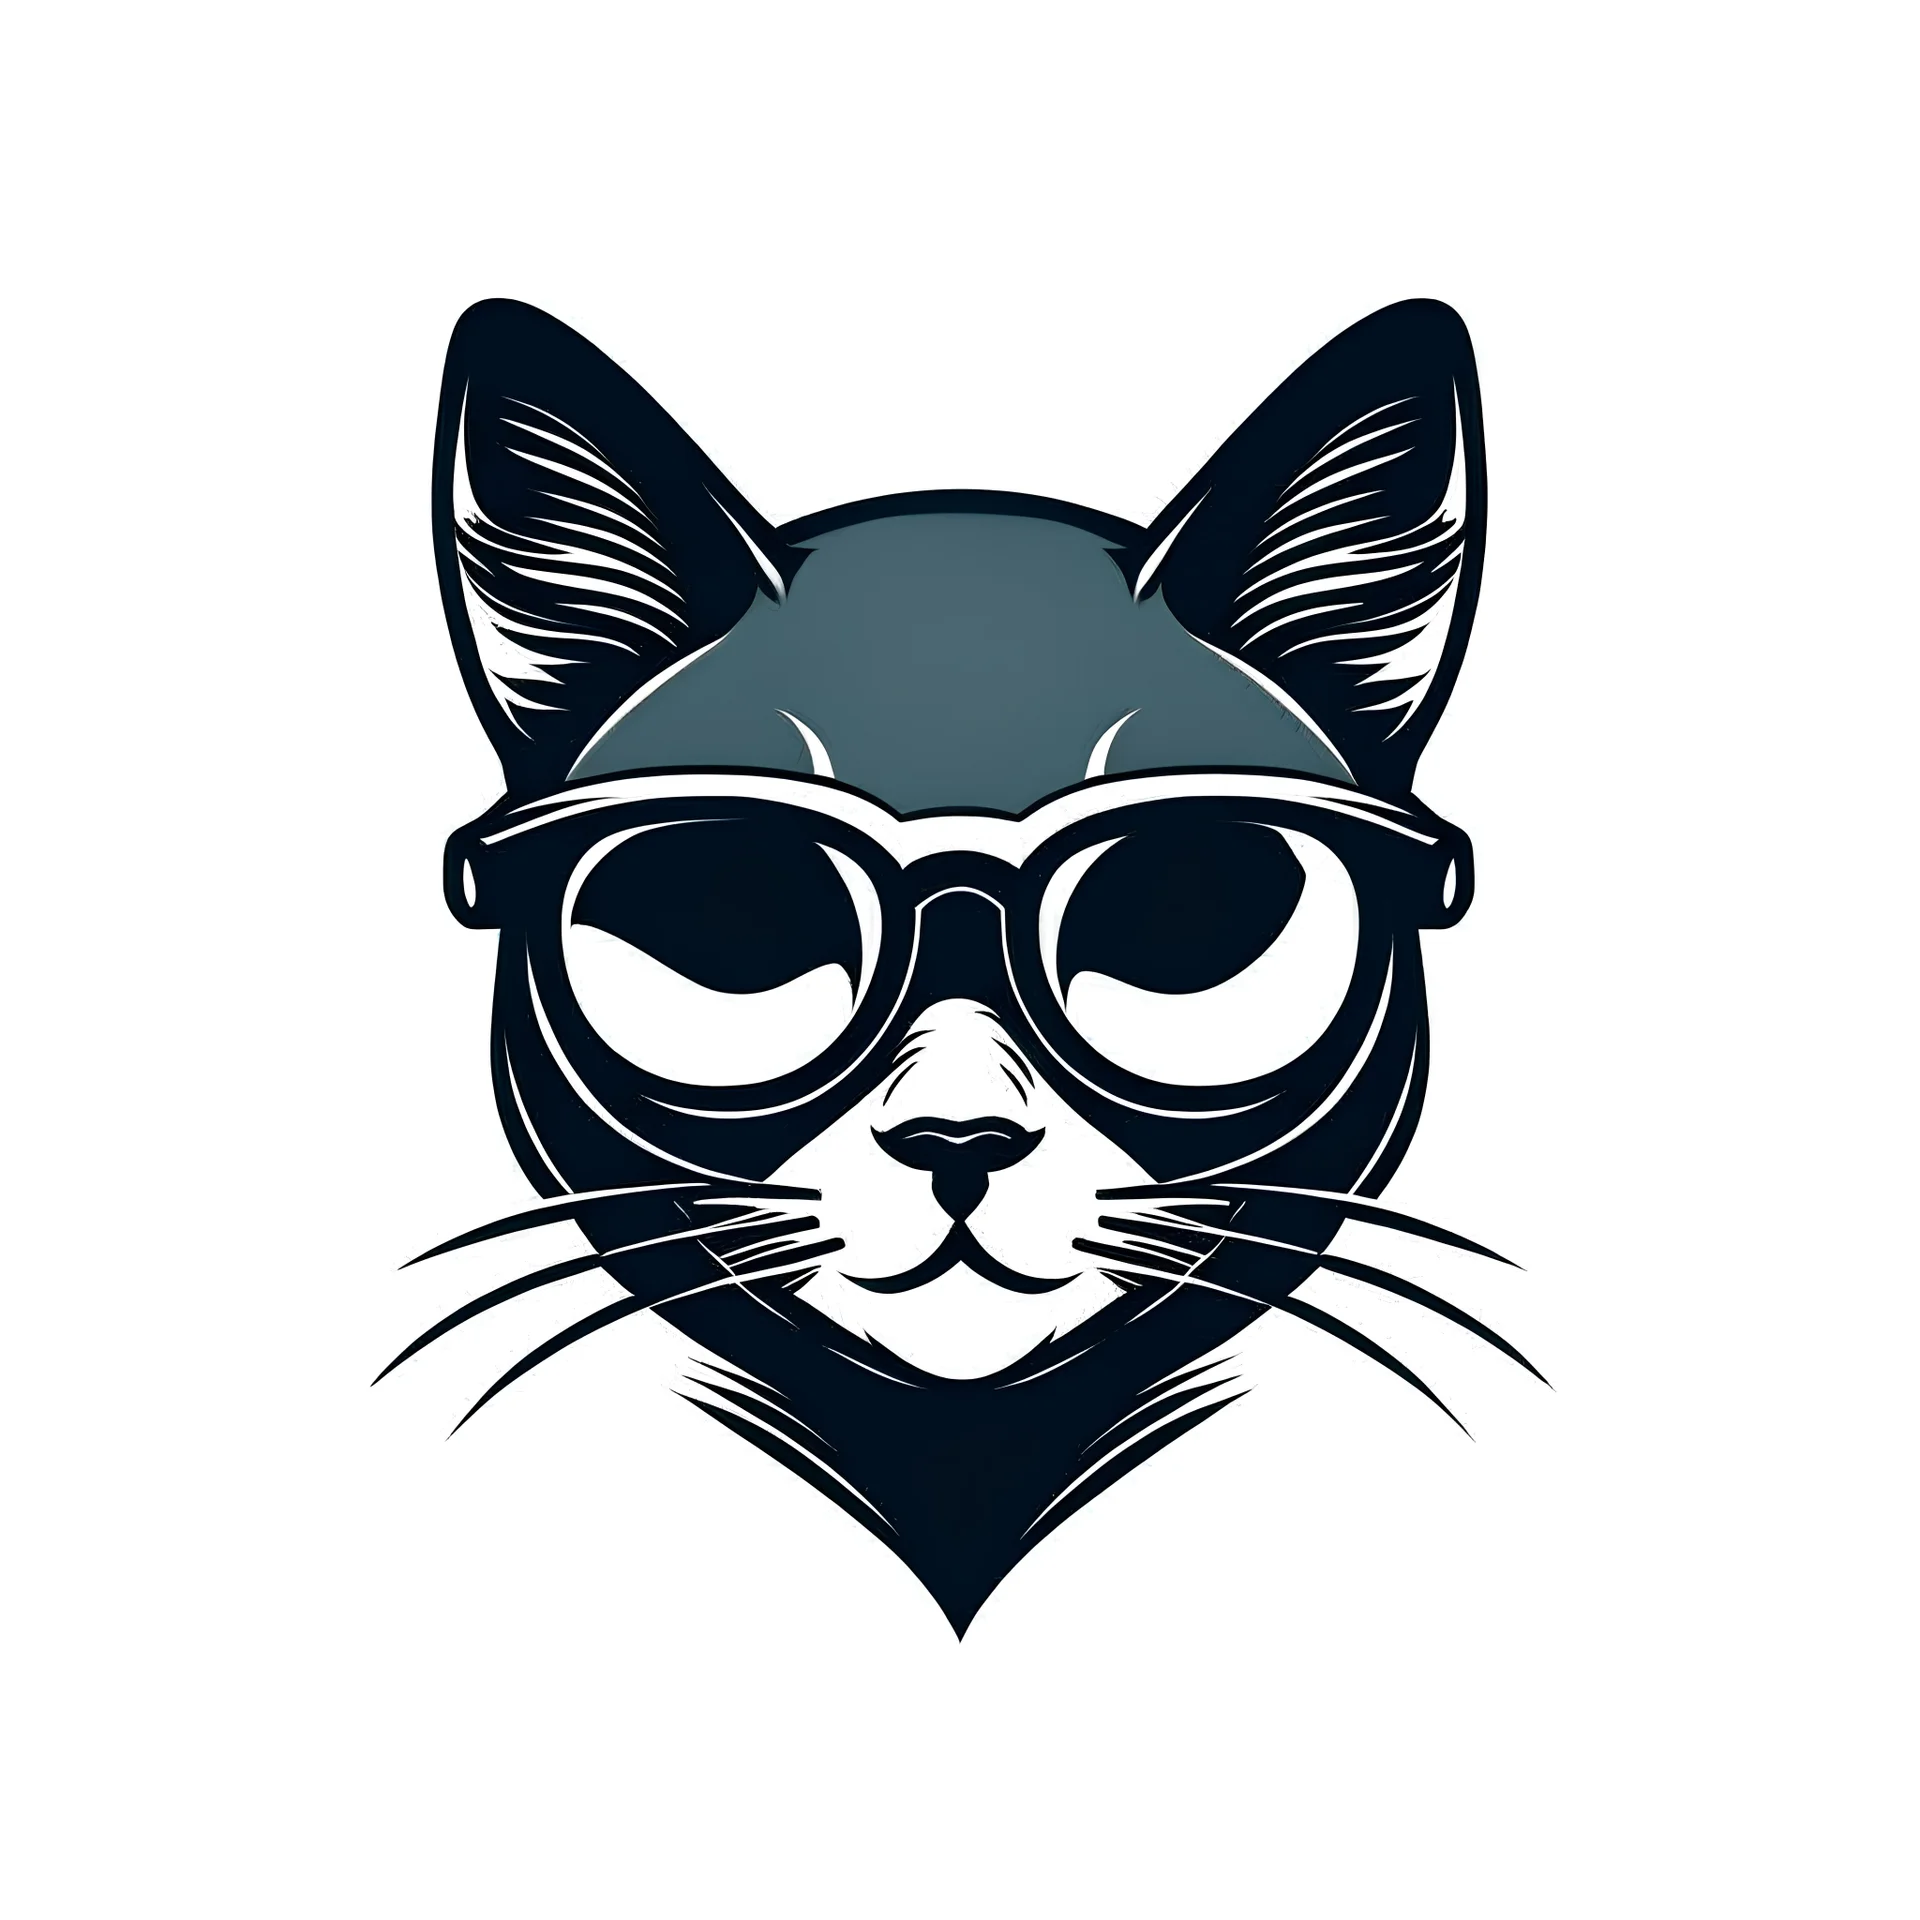 Cat head logo with sunglasses and a place to write the name at the bottom